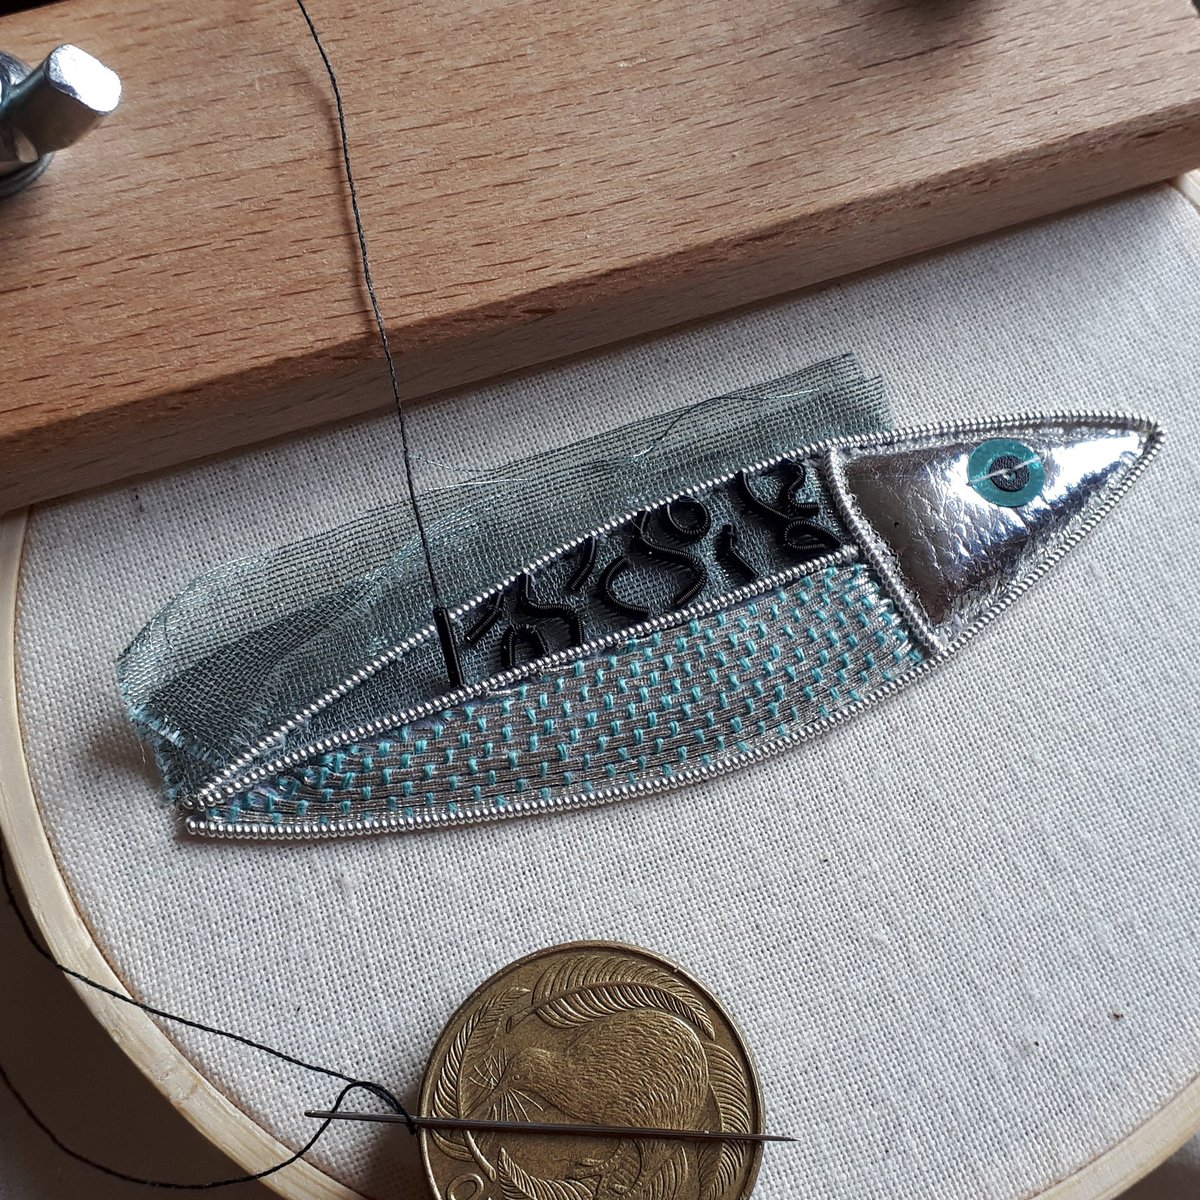 I love working on this part because it feels like I'm personalising my Hastings Mackerel to make it completely unique! Nearly finished now, then it will be ready to turn into a brooch. #embroidery #goldwork #goldworkembroidery #embroideryproject #embroiderykit #beckyhoggkit #fish